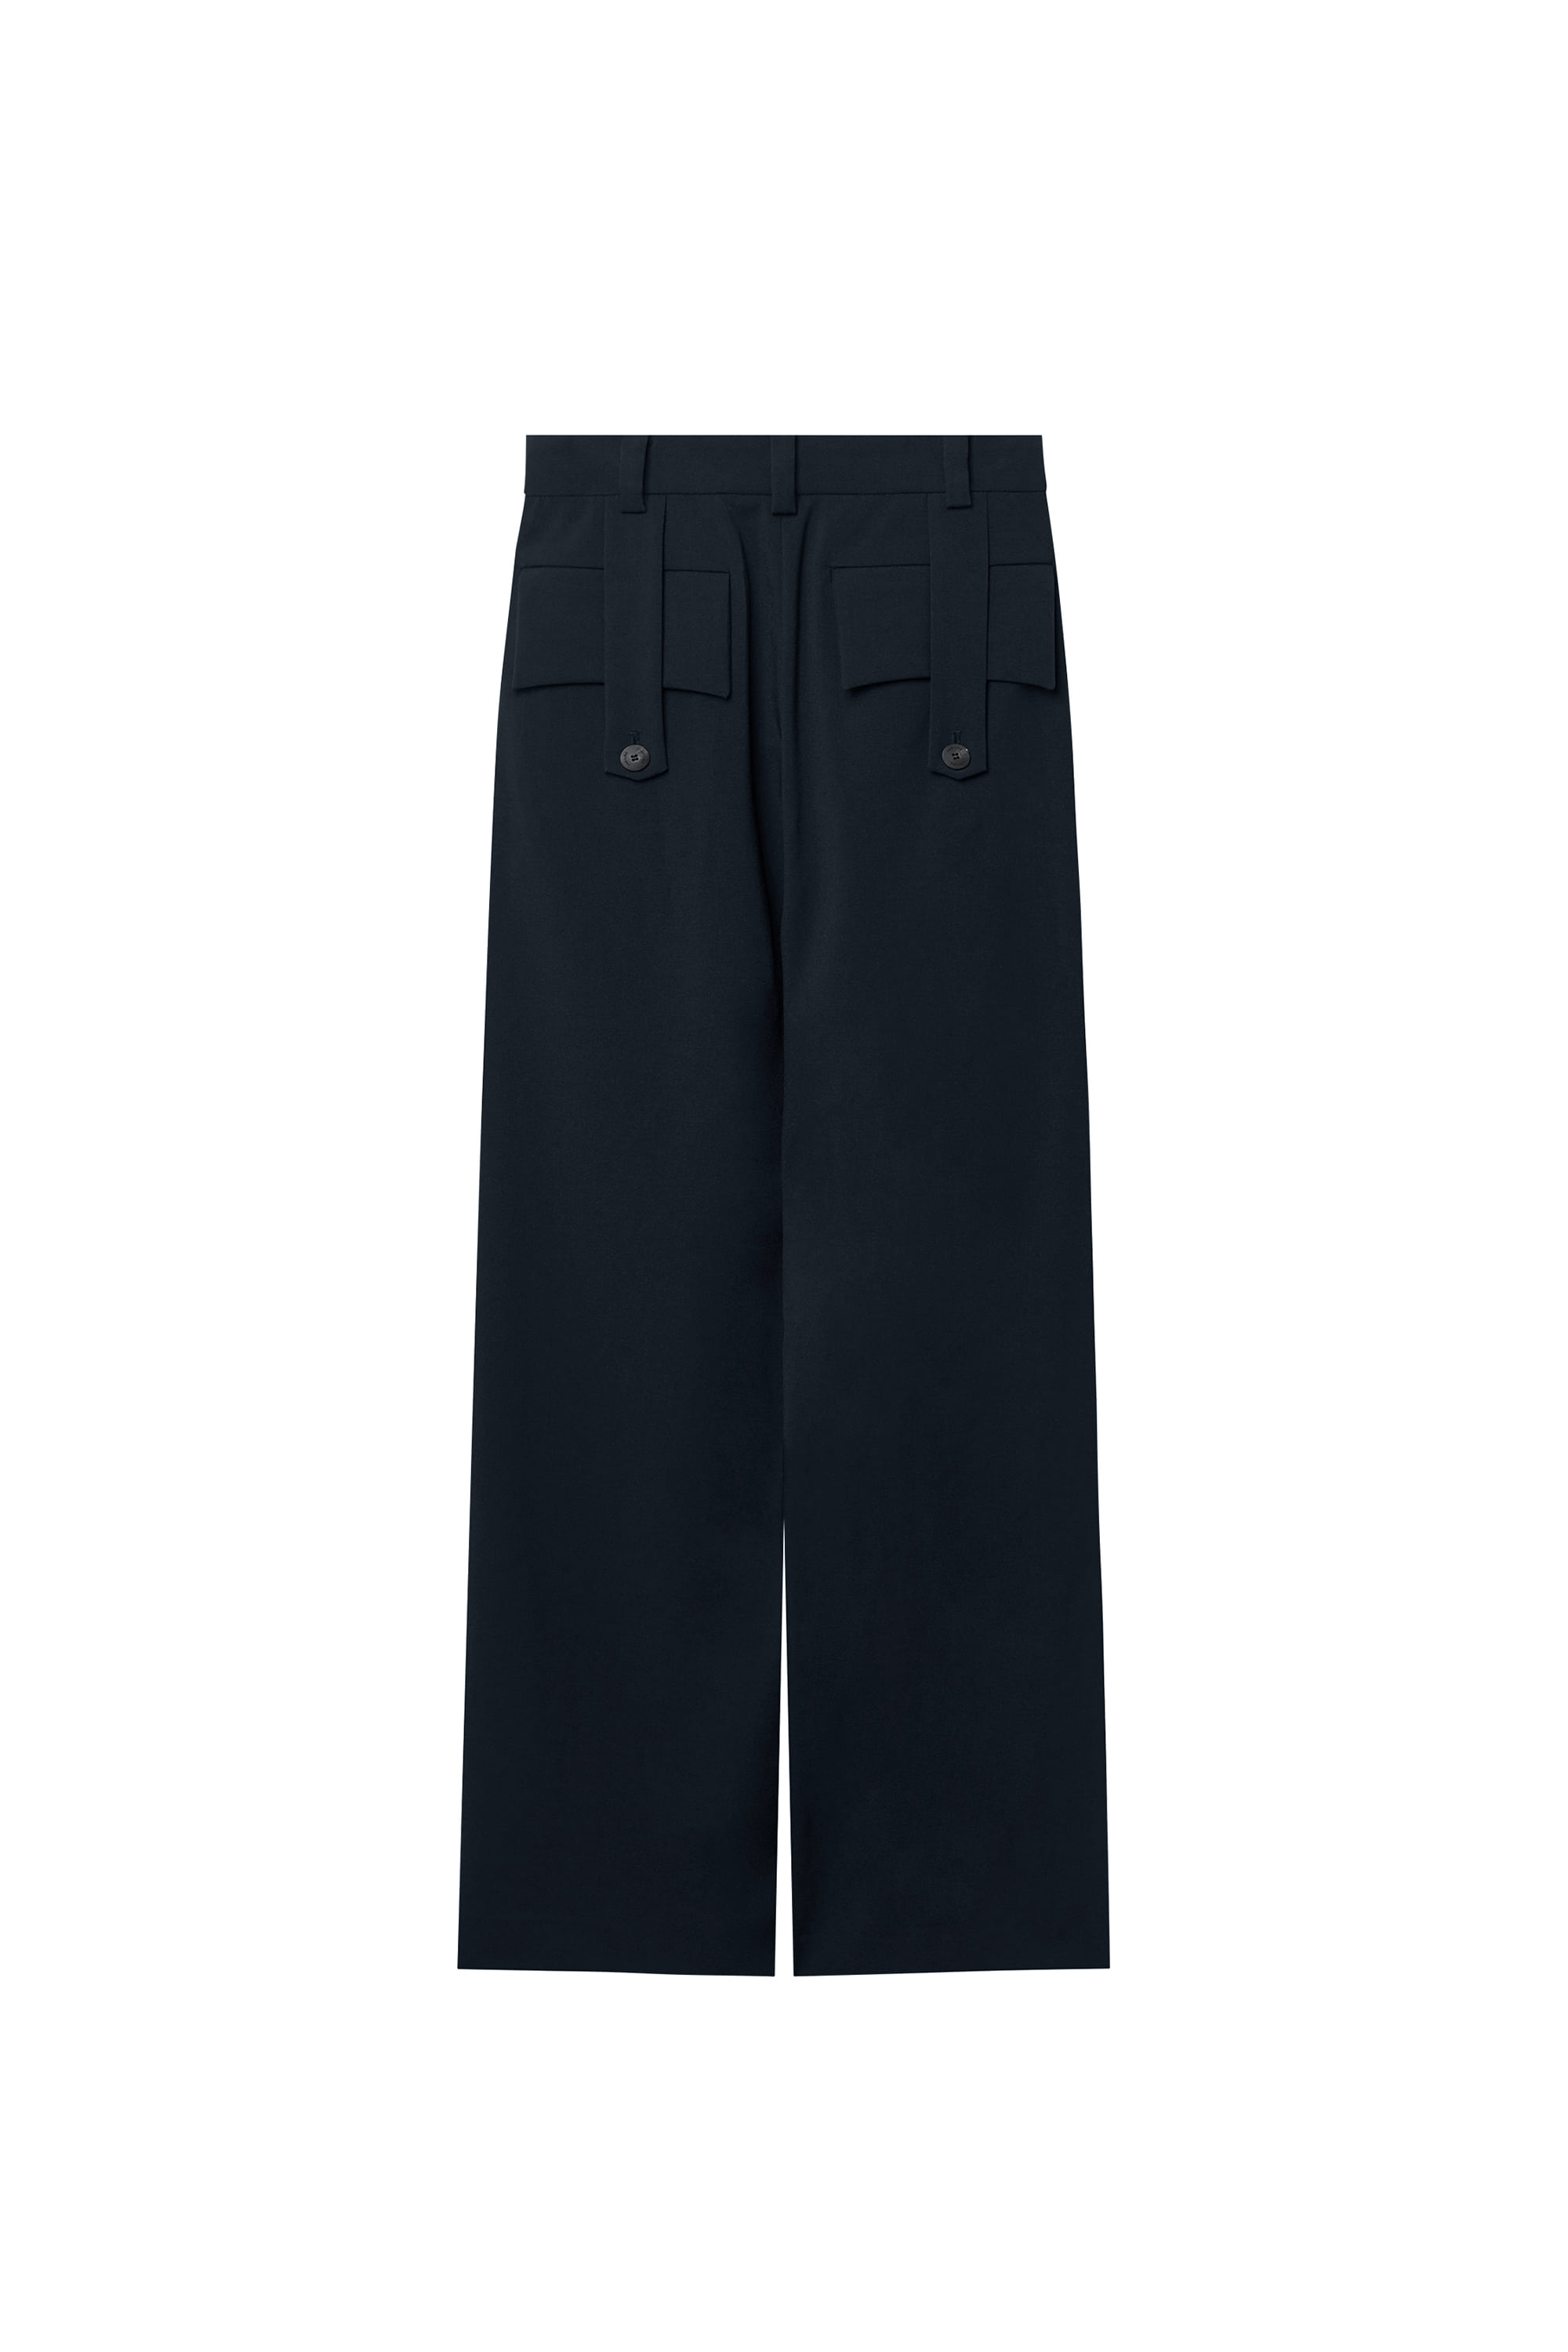 LETTER POCKET WIDE TROUSERS navy